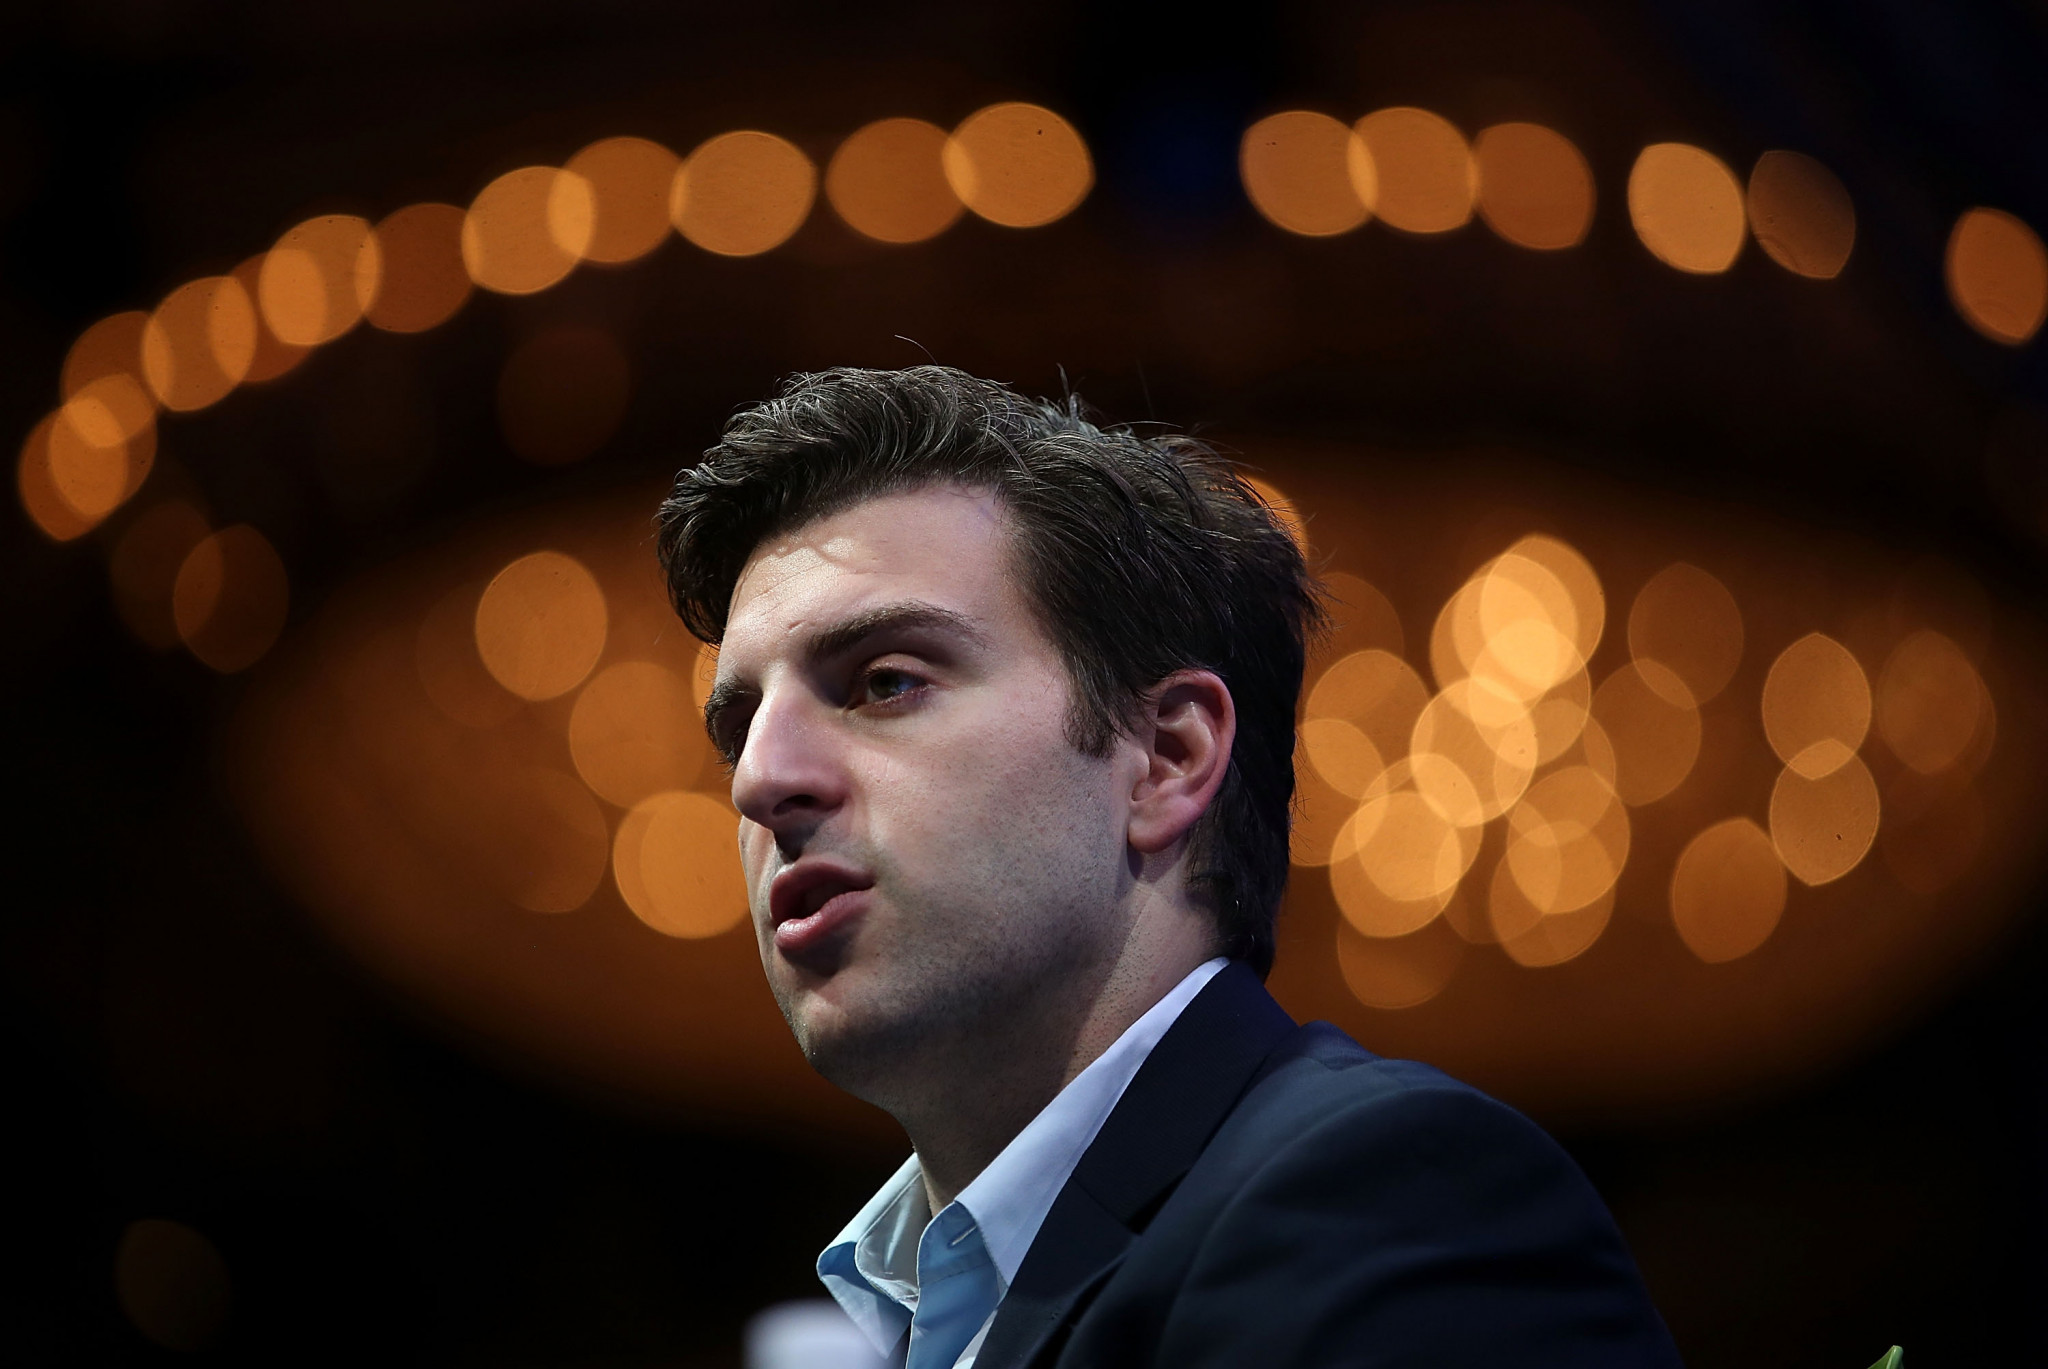 Airbnb co-founder and chief executive Brian Chesky said the tight revenue cuts showed the organization was 